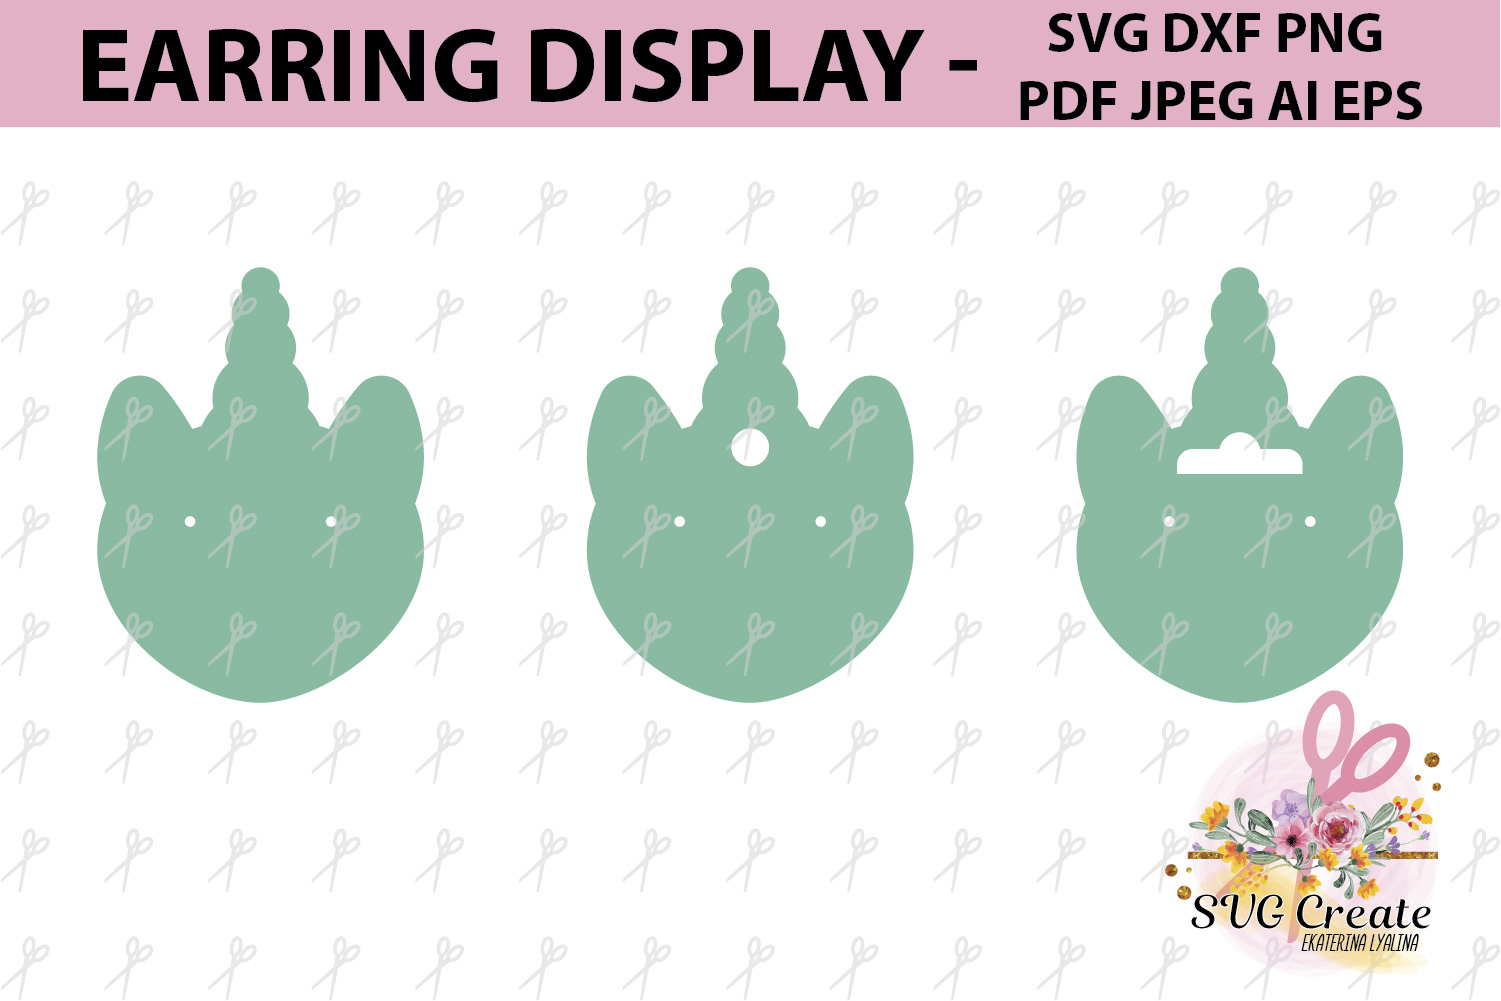 Download Earring cards svg, earring display svg, earring display ...